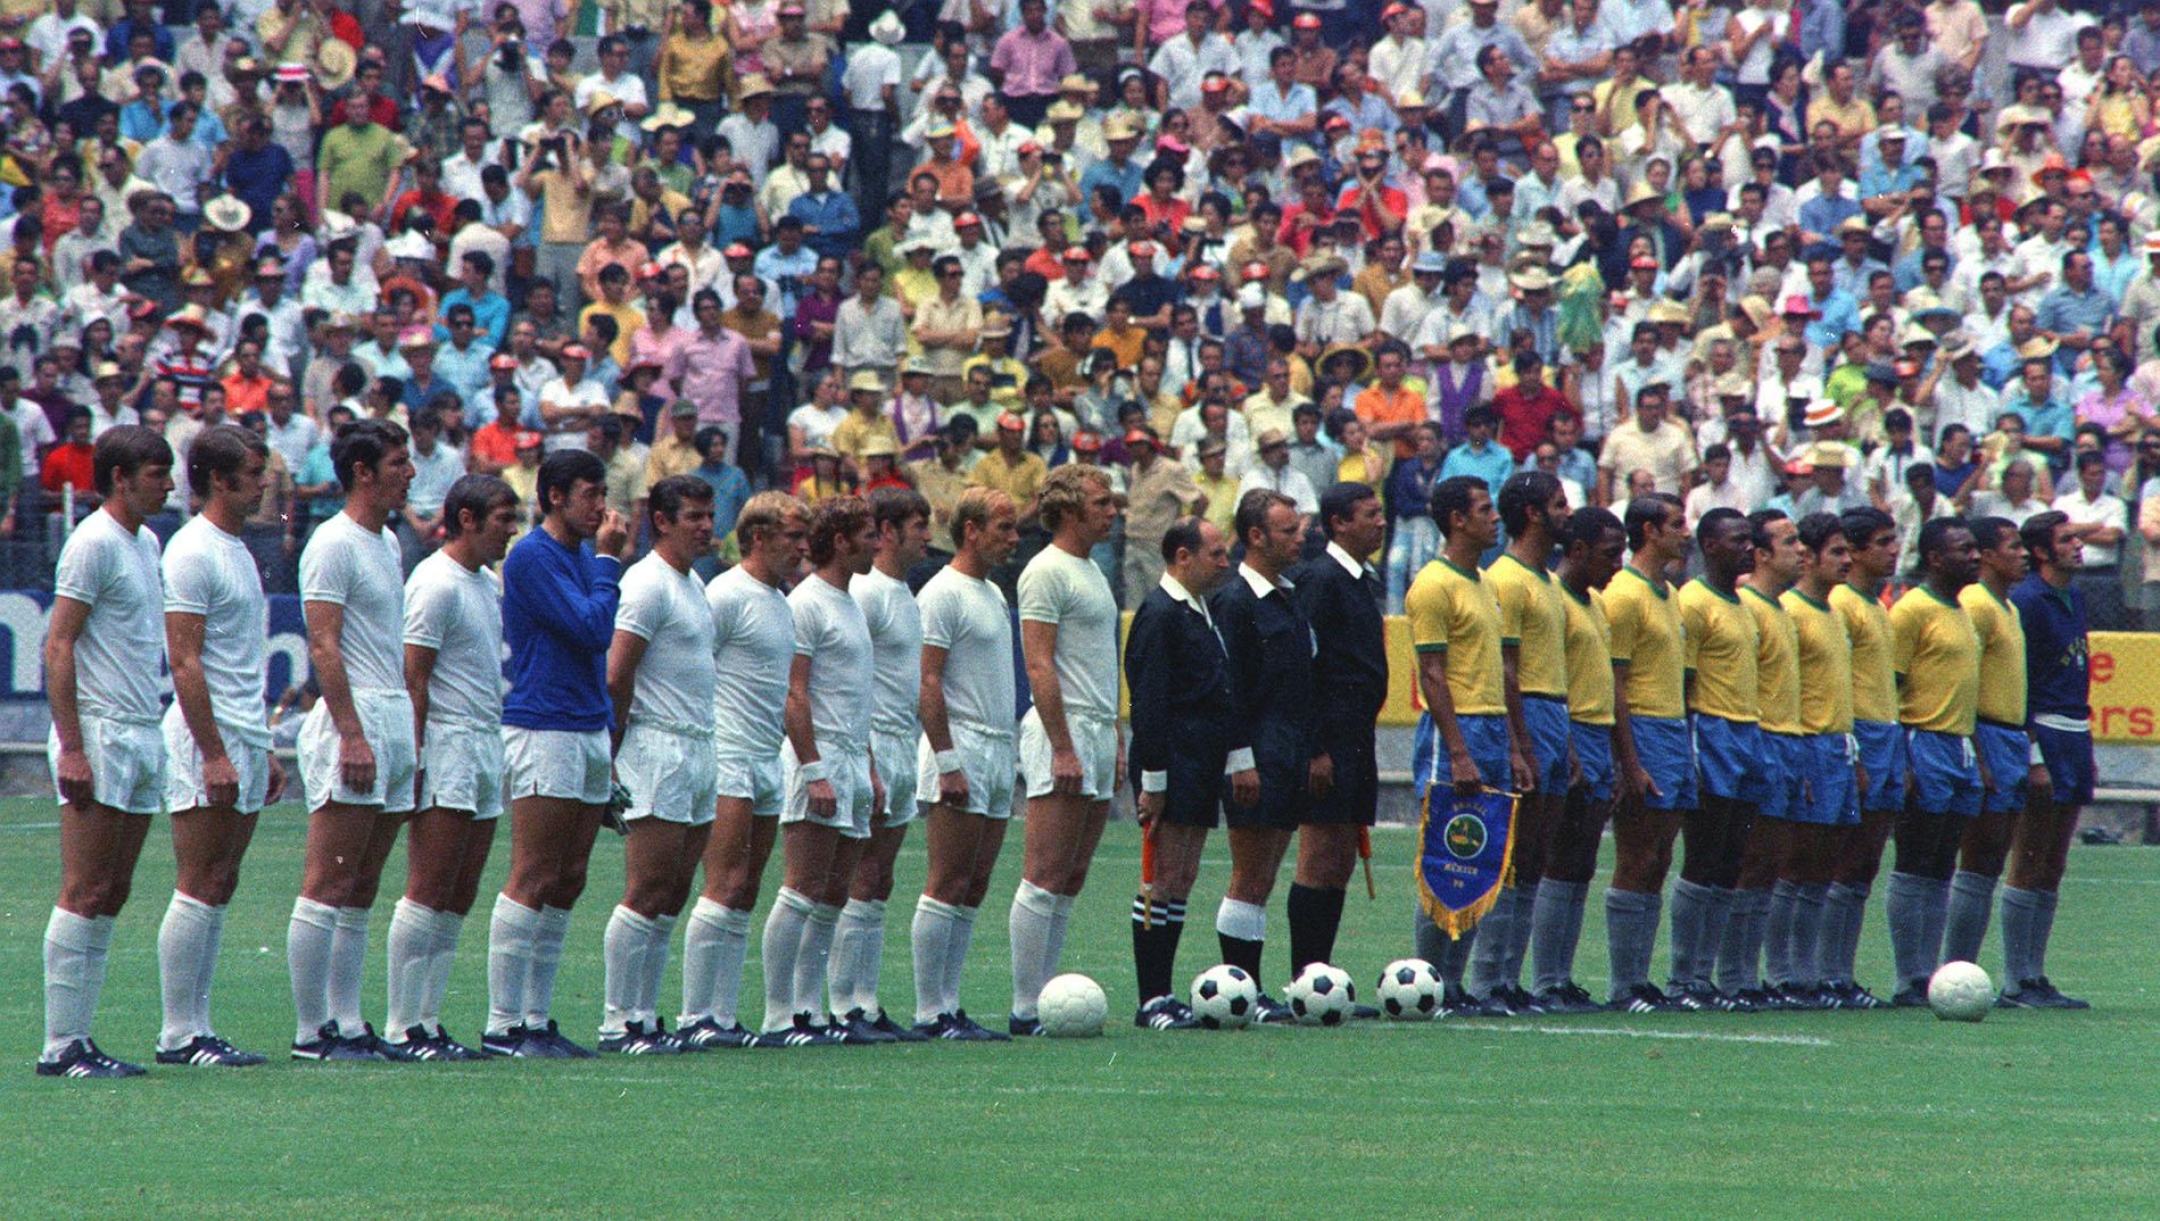 **  FILE  **  Teams from England and Brazil line up prior to their World Cup match in Jalisco Stadium in Mexico, June 7 1970, which was the last time the two countries met in a World Cup match. On Friday June 21, 2002, the teams from the two countries will play in a World Cup quarterfinal match in Japan. (AP Photo/File)